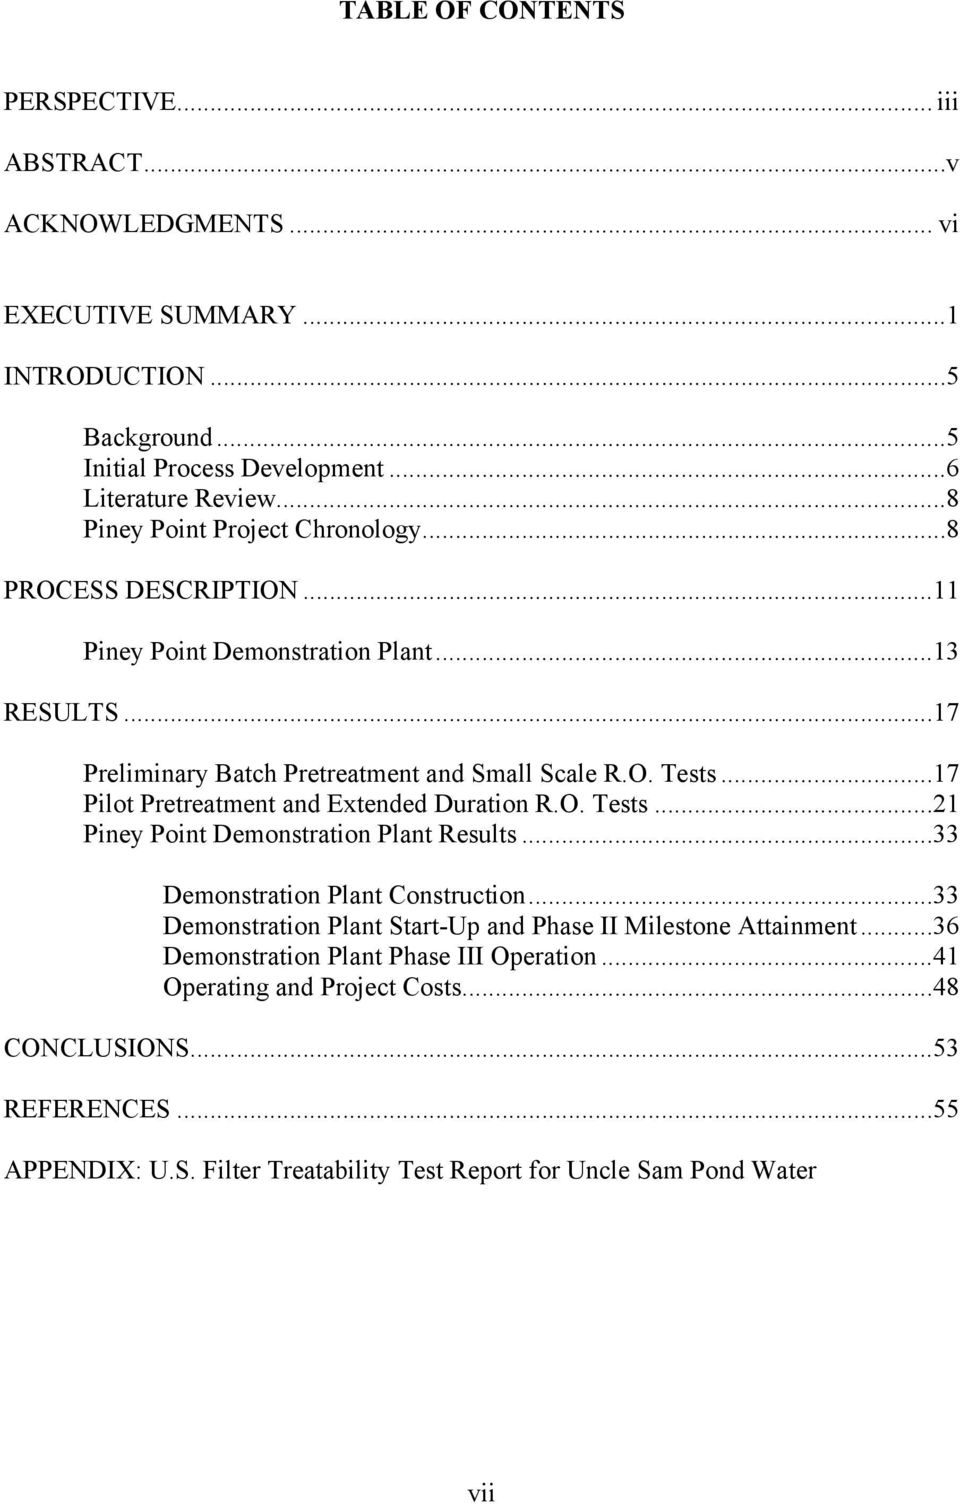 ..17 Pilot Pretreatment and Extended Duration R.O. Tests...21 Piney Point Demonstration Plant Results...33 Demonstration Plant Construction.